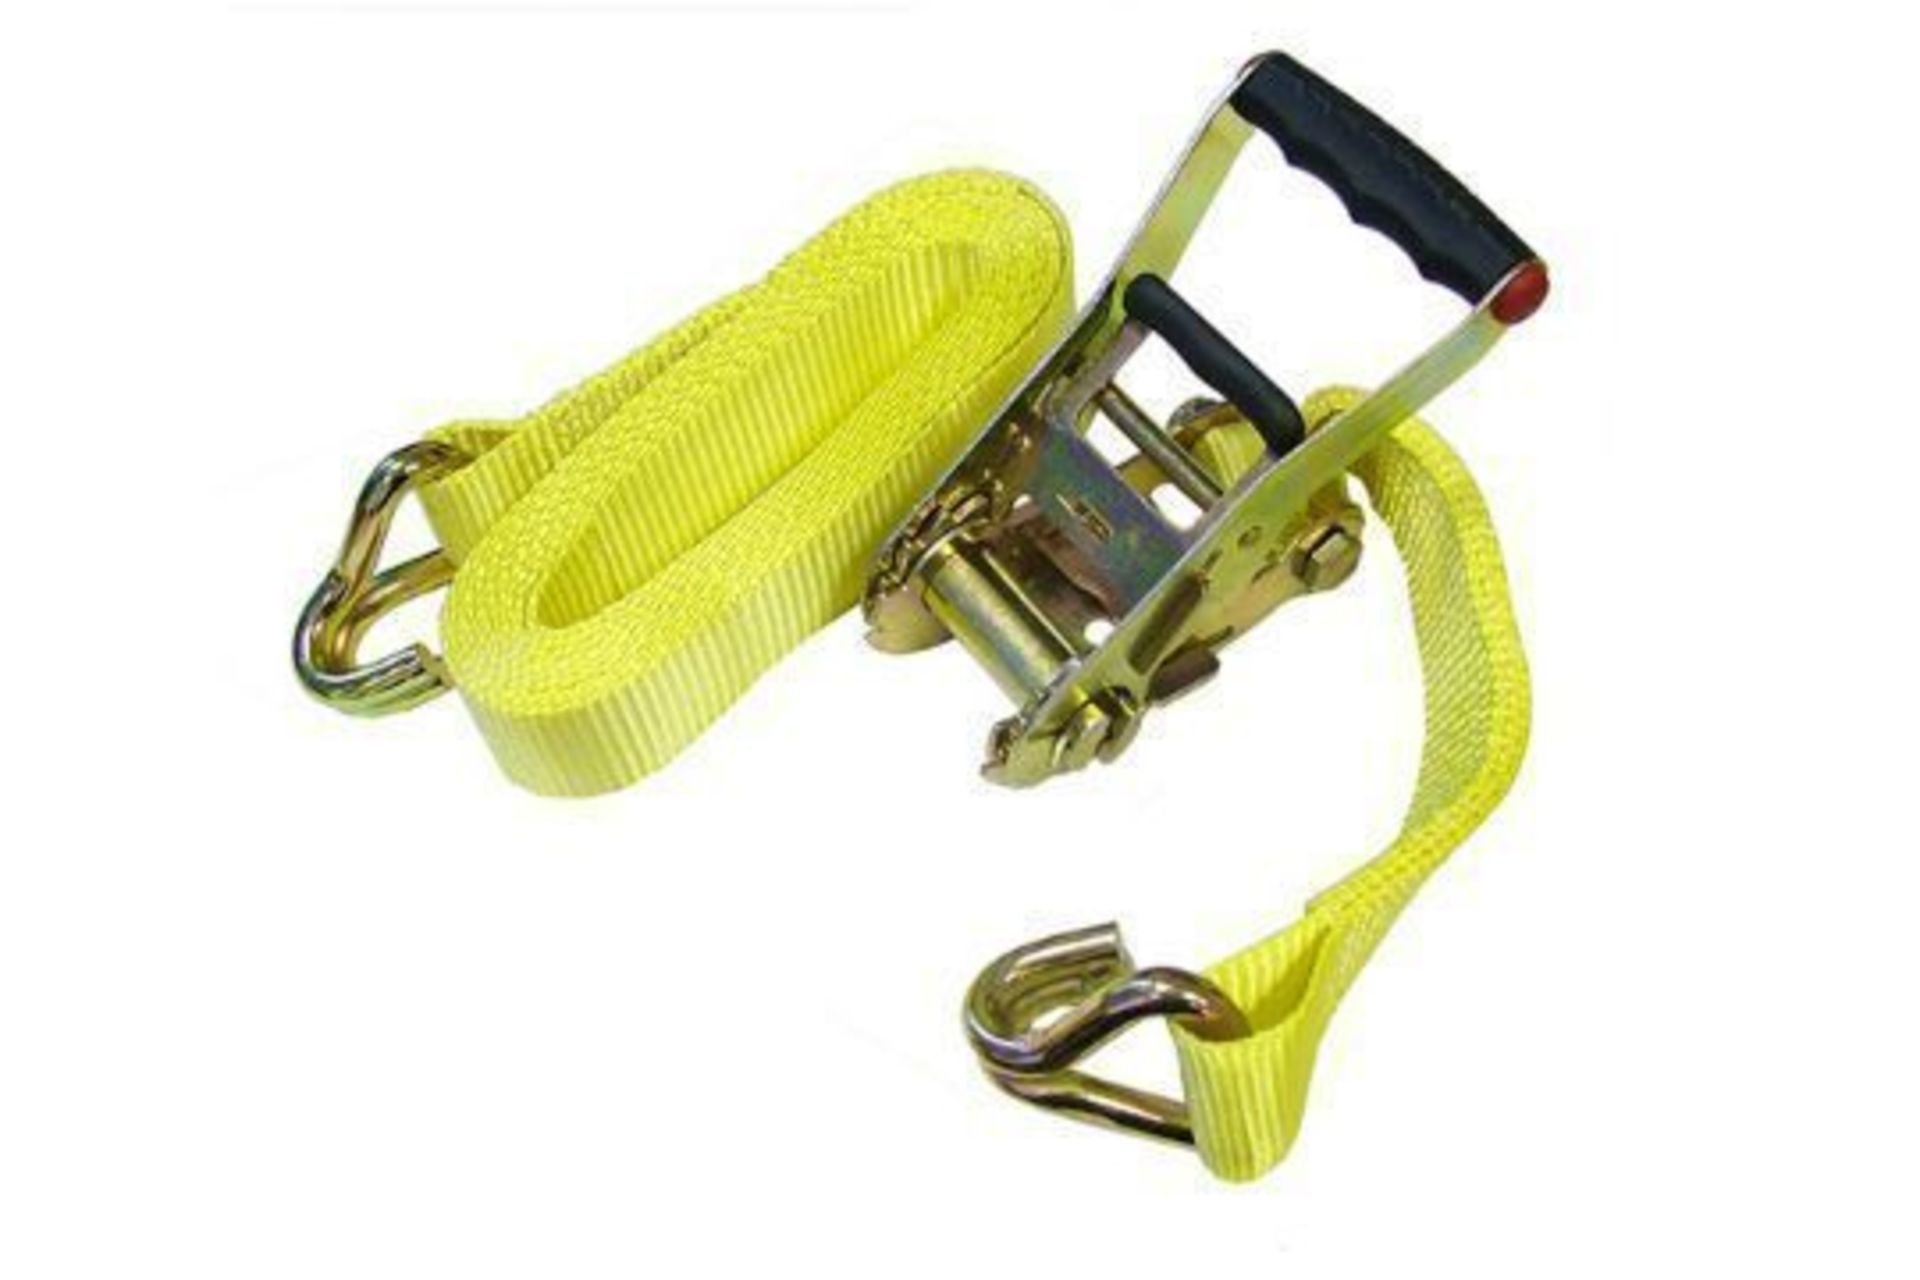 New Roadster 14ft Ratchet Tie Down Up To 2000kg Capacity